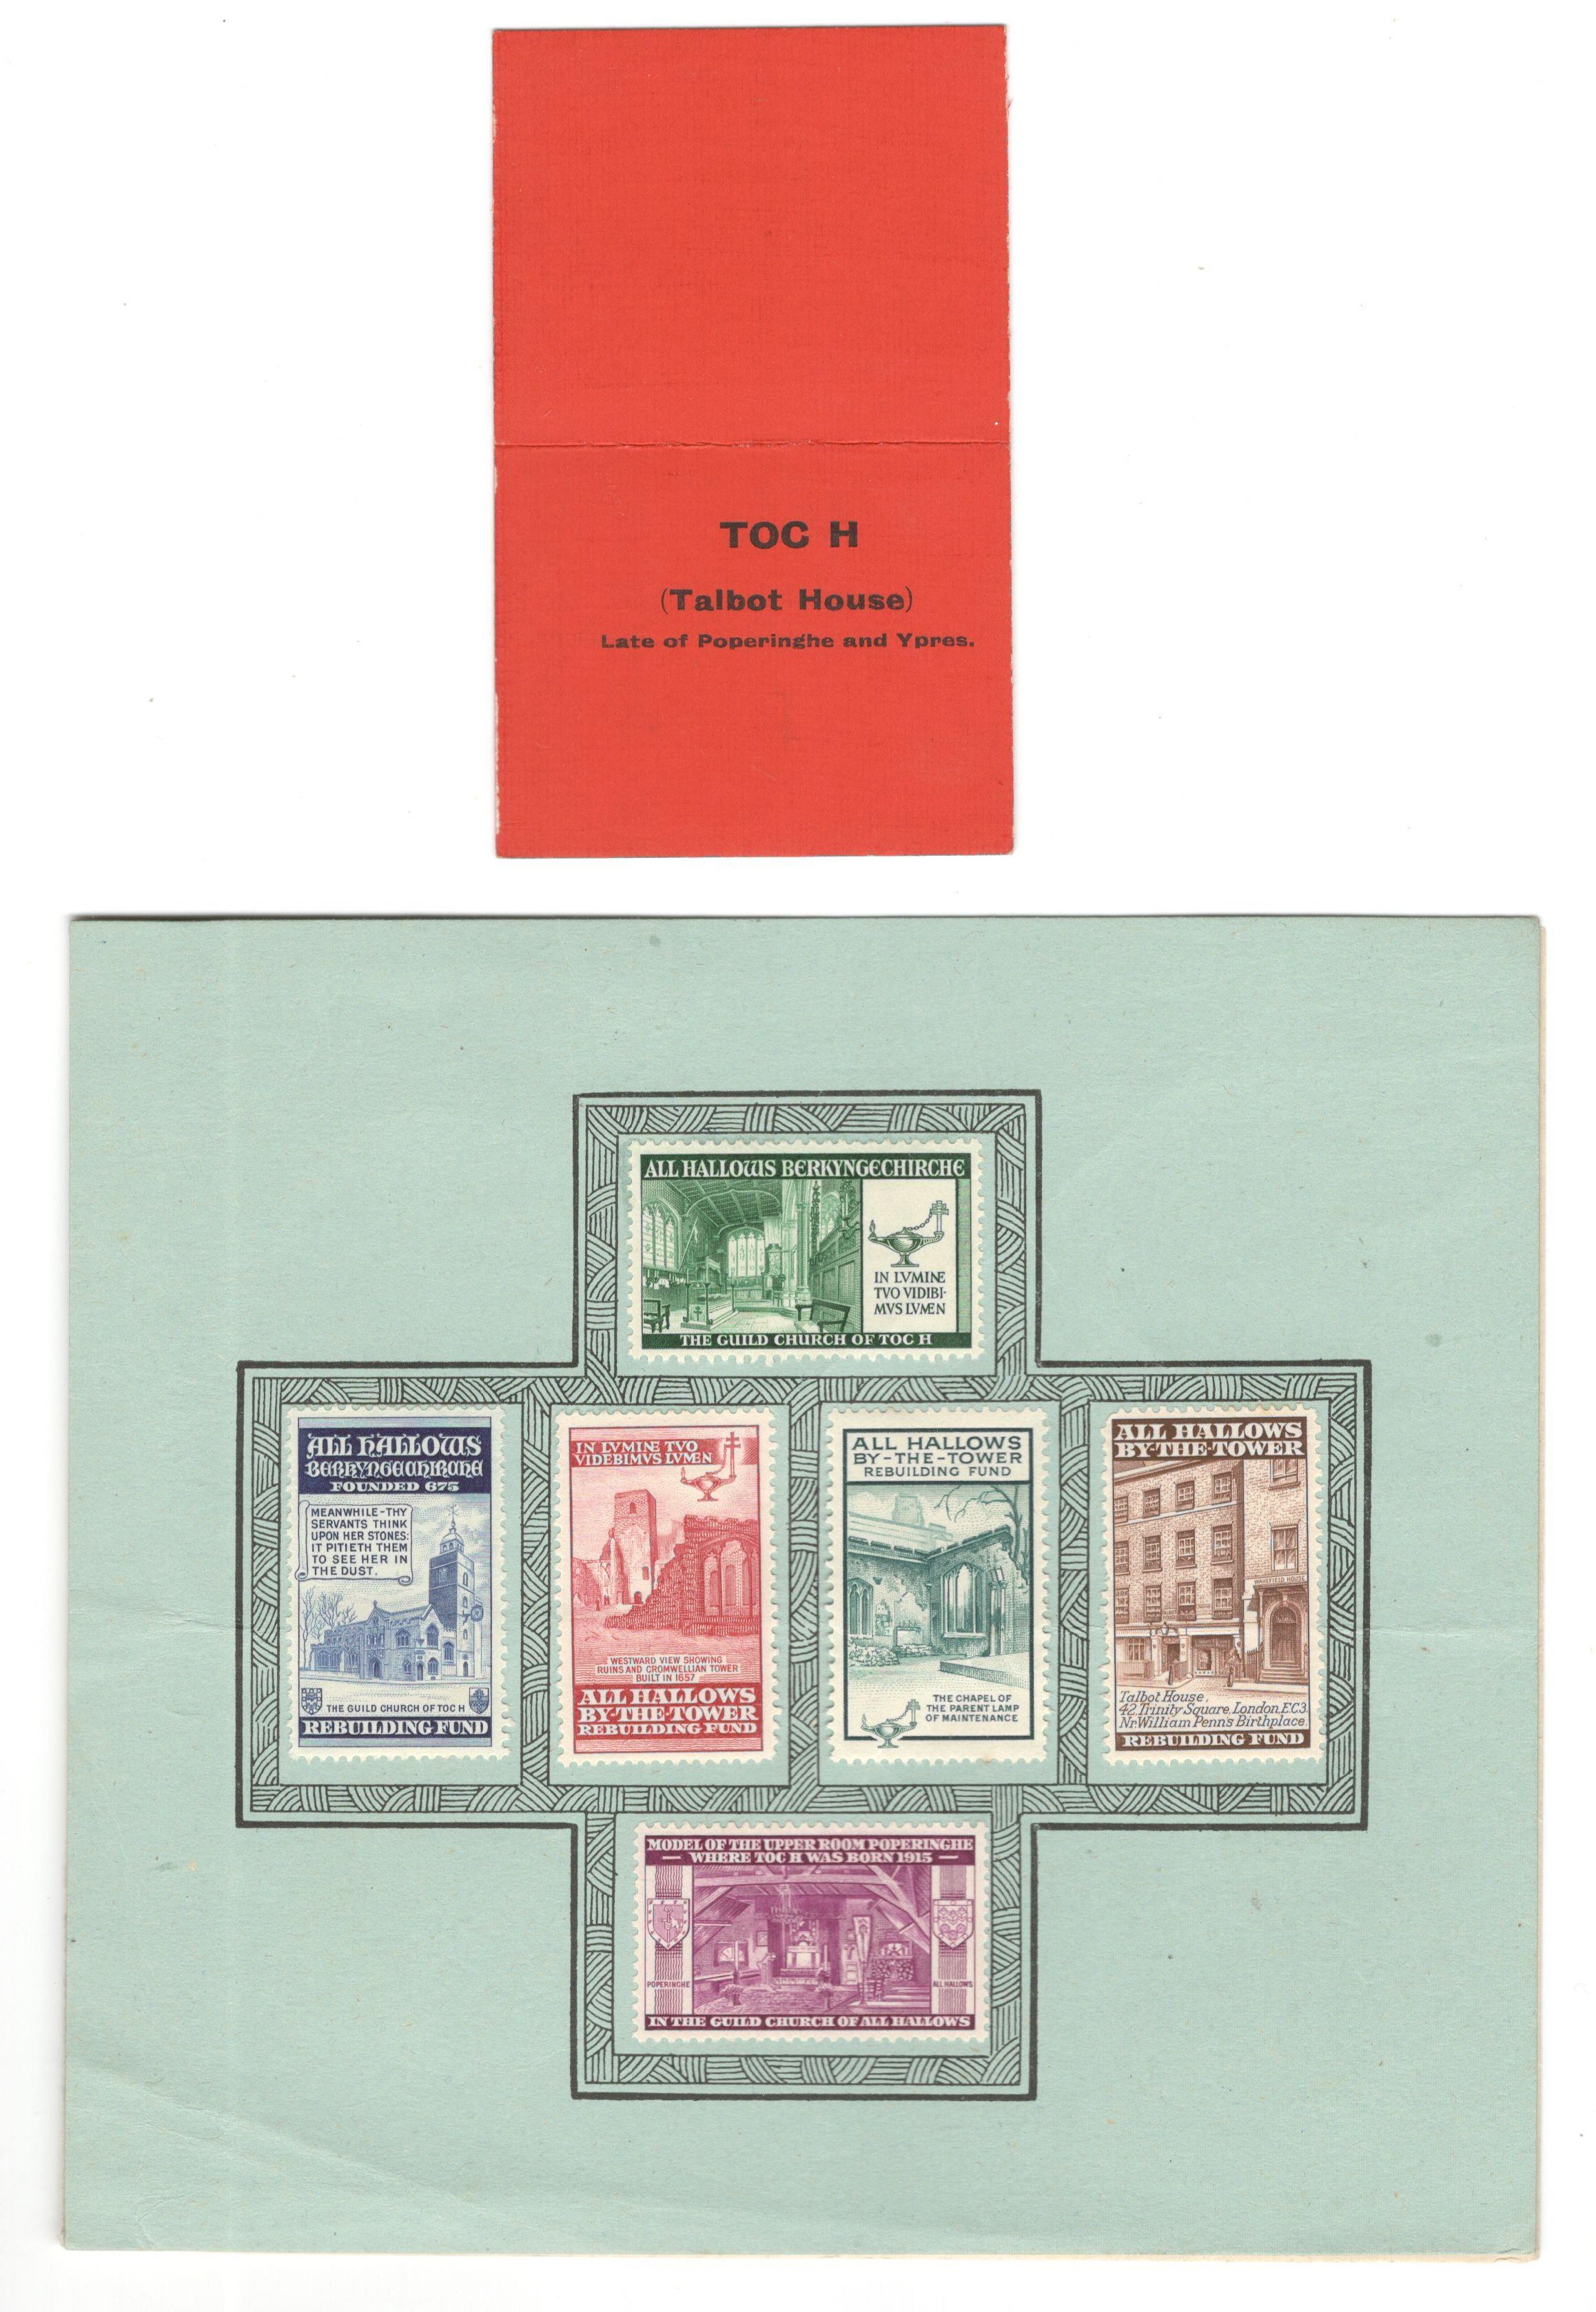 TALBOT HOUSE MEMBERS TICKET & SPECIAL SET OF STAMPS - Image 2 of 3